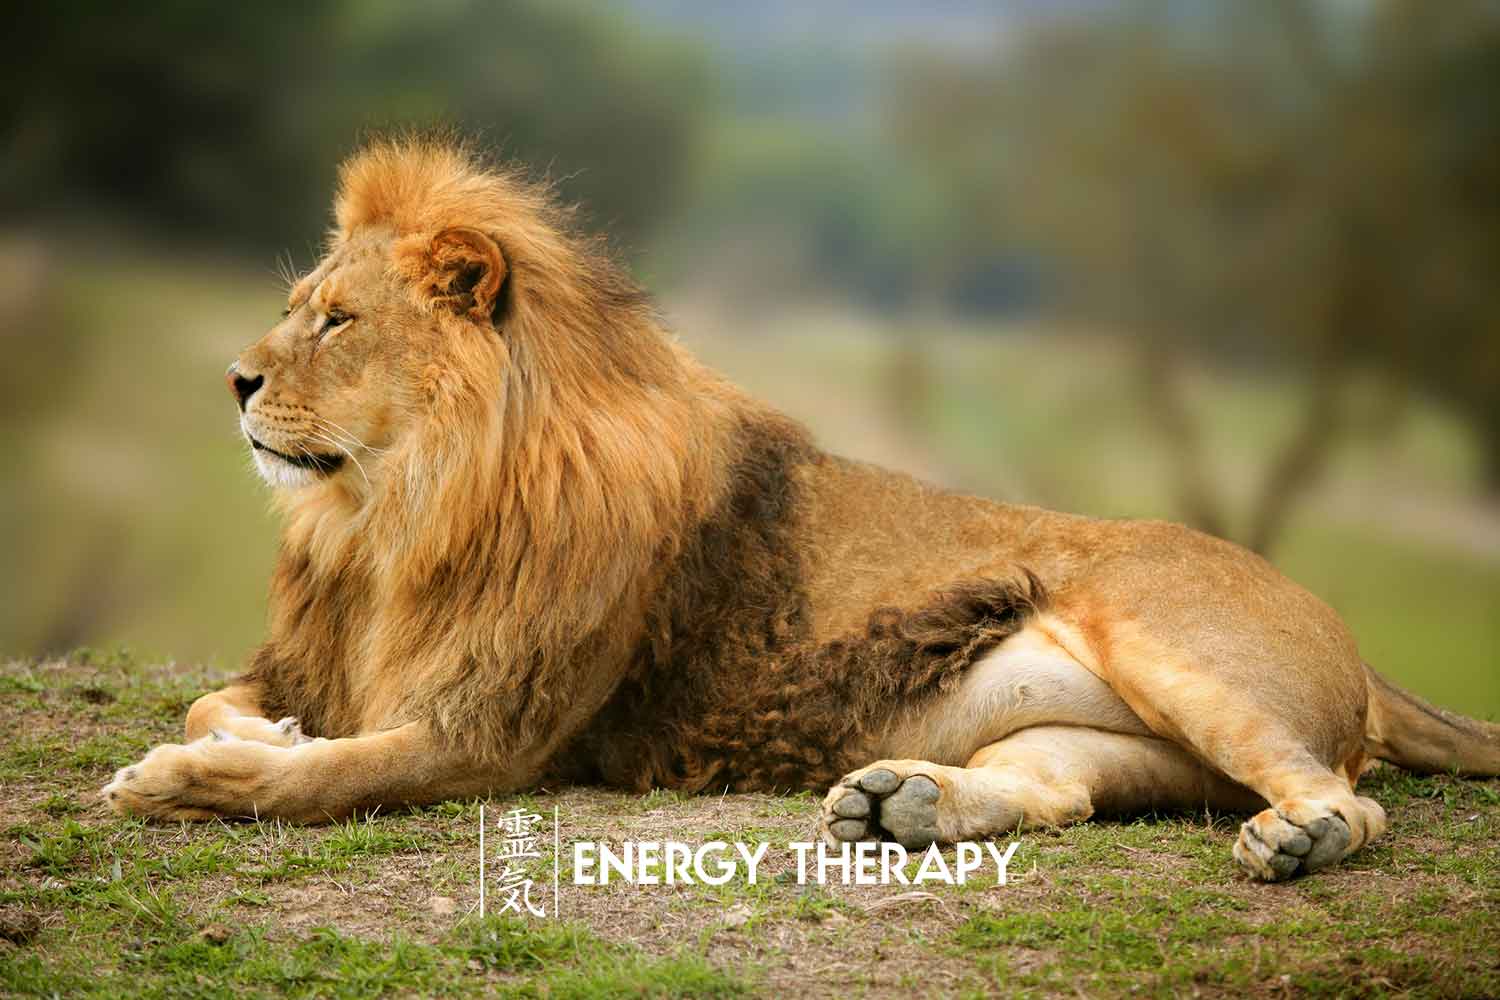 ESP & Animal Communication: A Walk with Lions and a 'Cheetah Massage' -  Energy Therapy